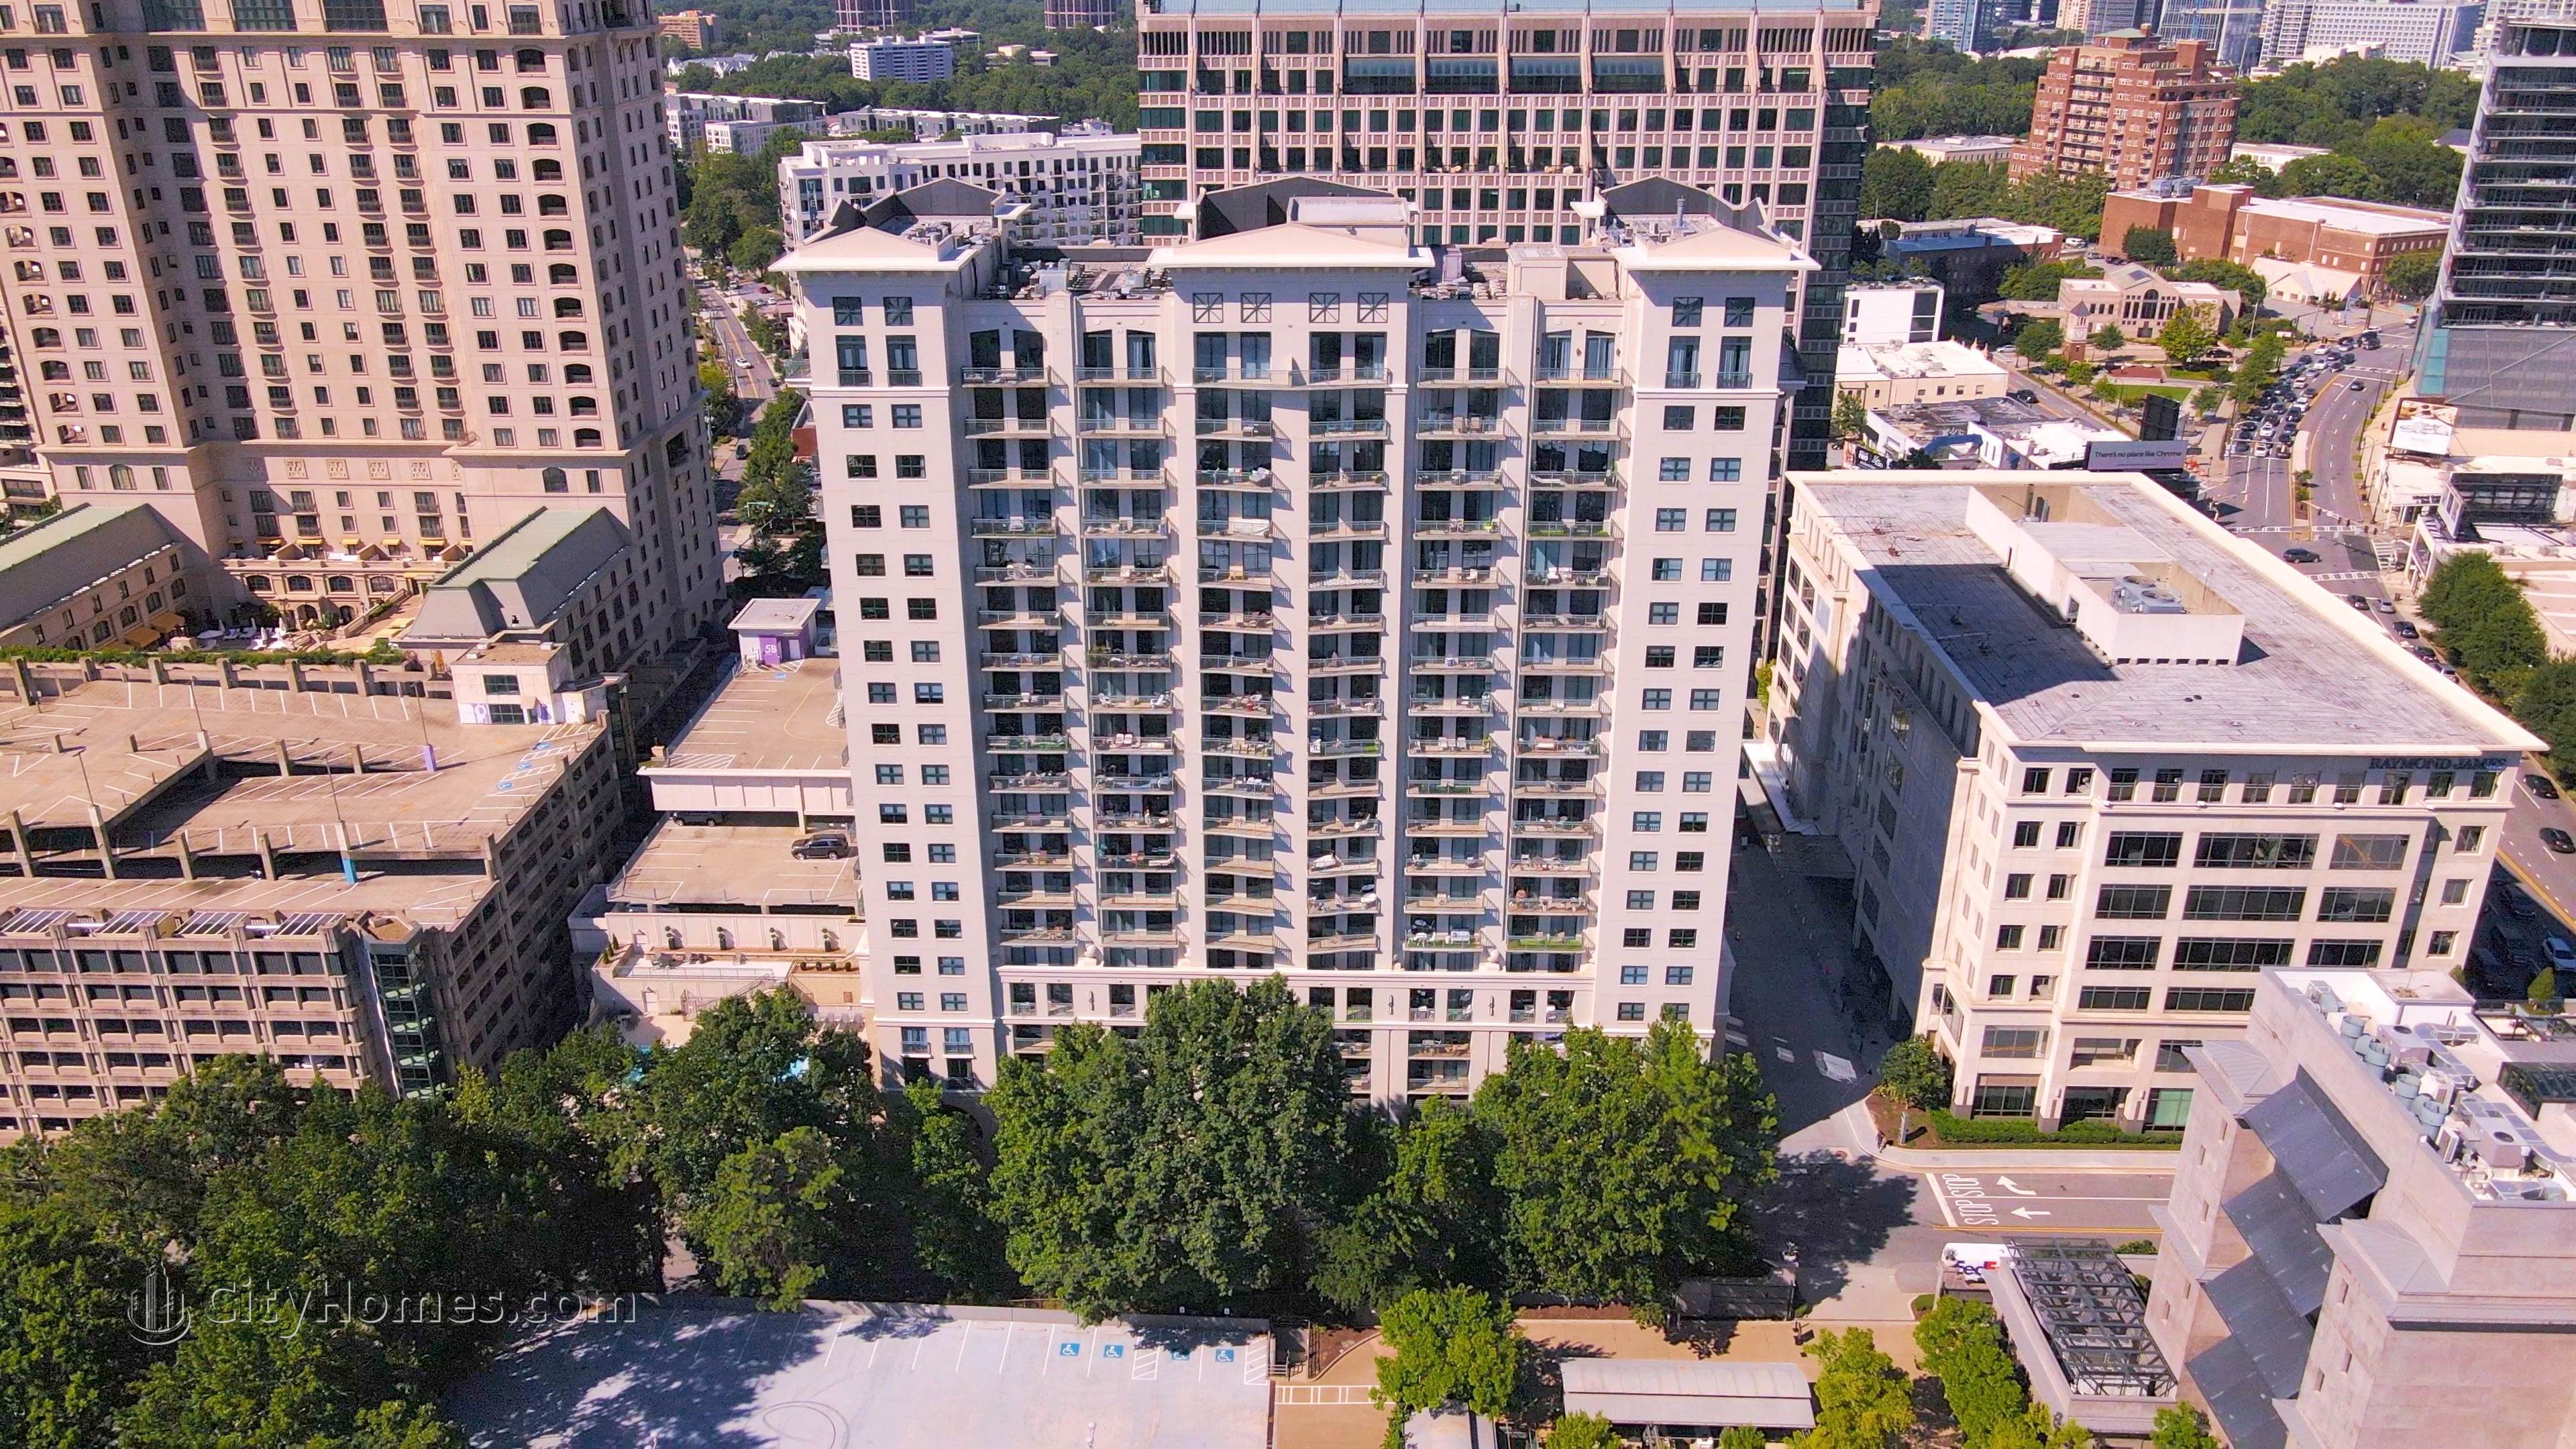 2. Ovation Condos building at 3040 Peachtree Rd NW, Peachtree Heights West, Atlanta, GA 30305